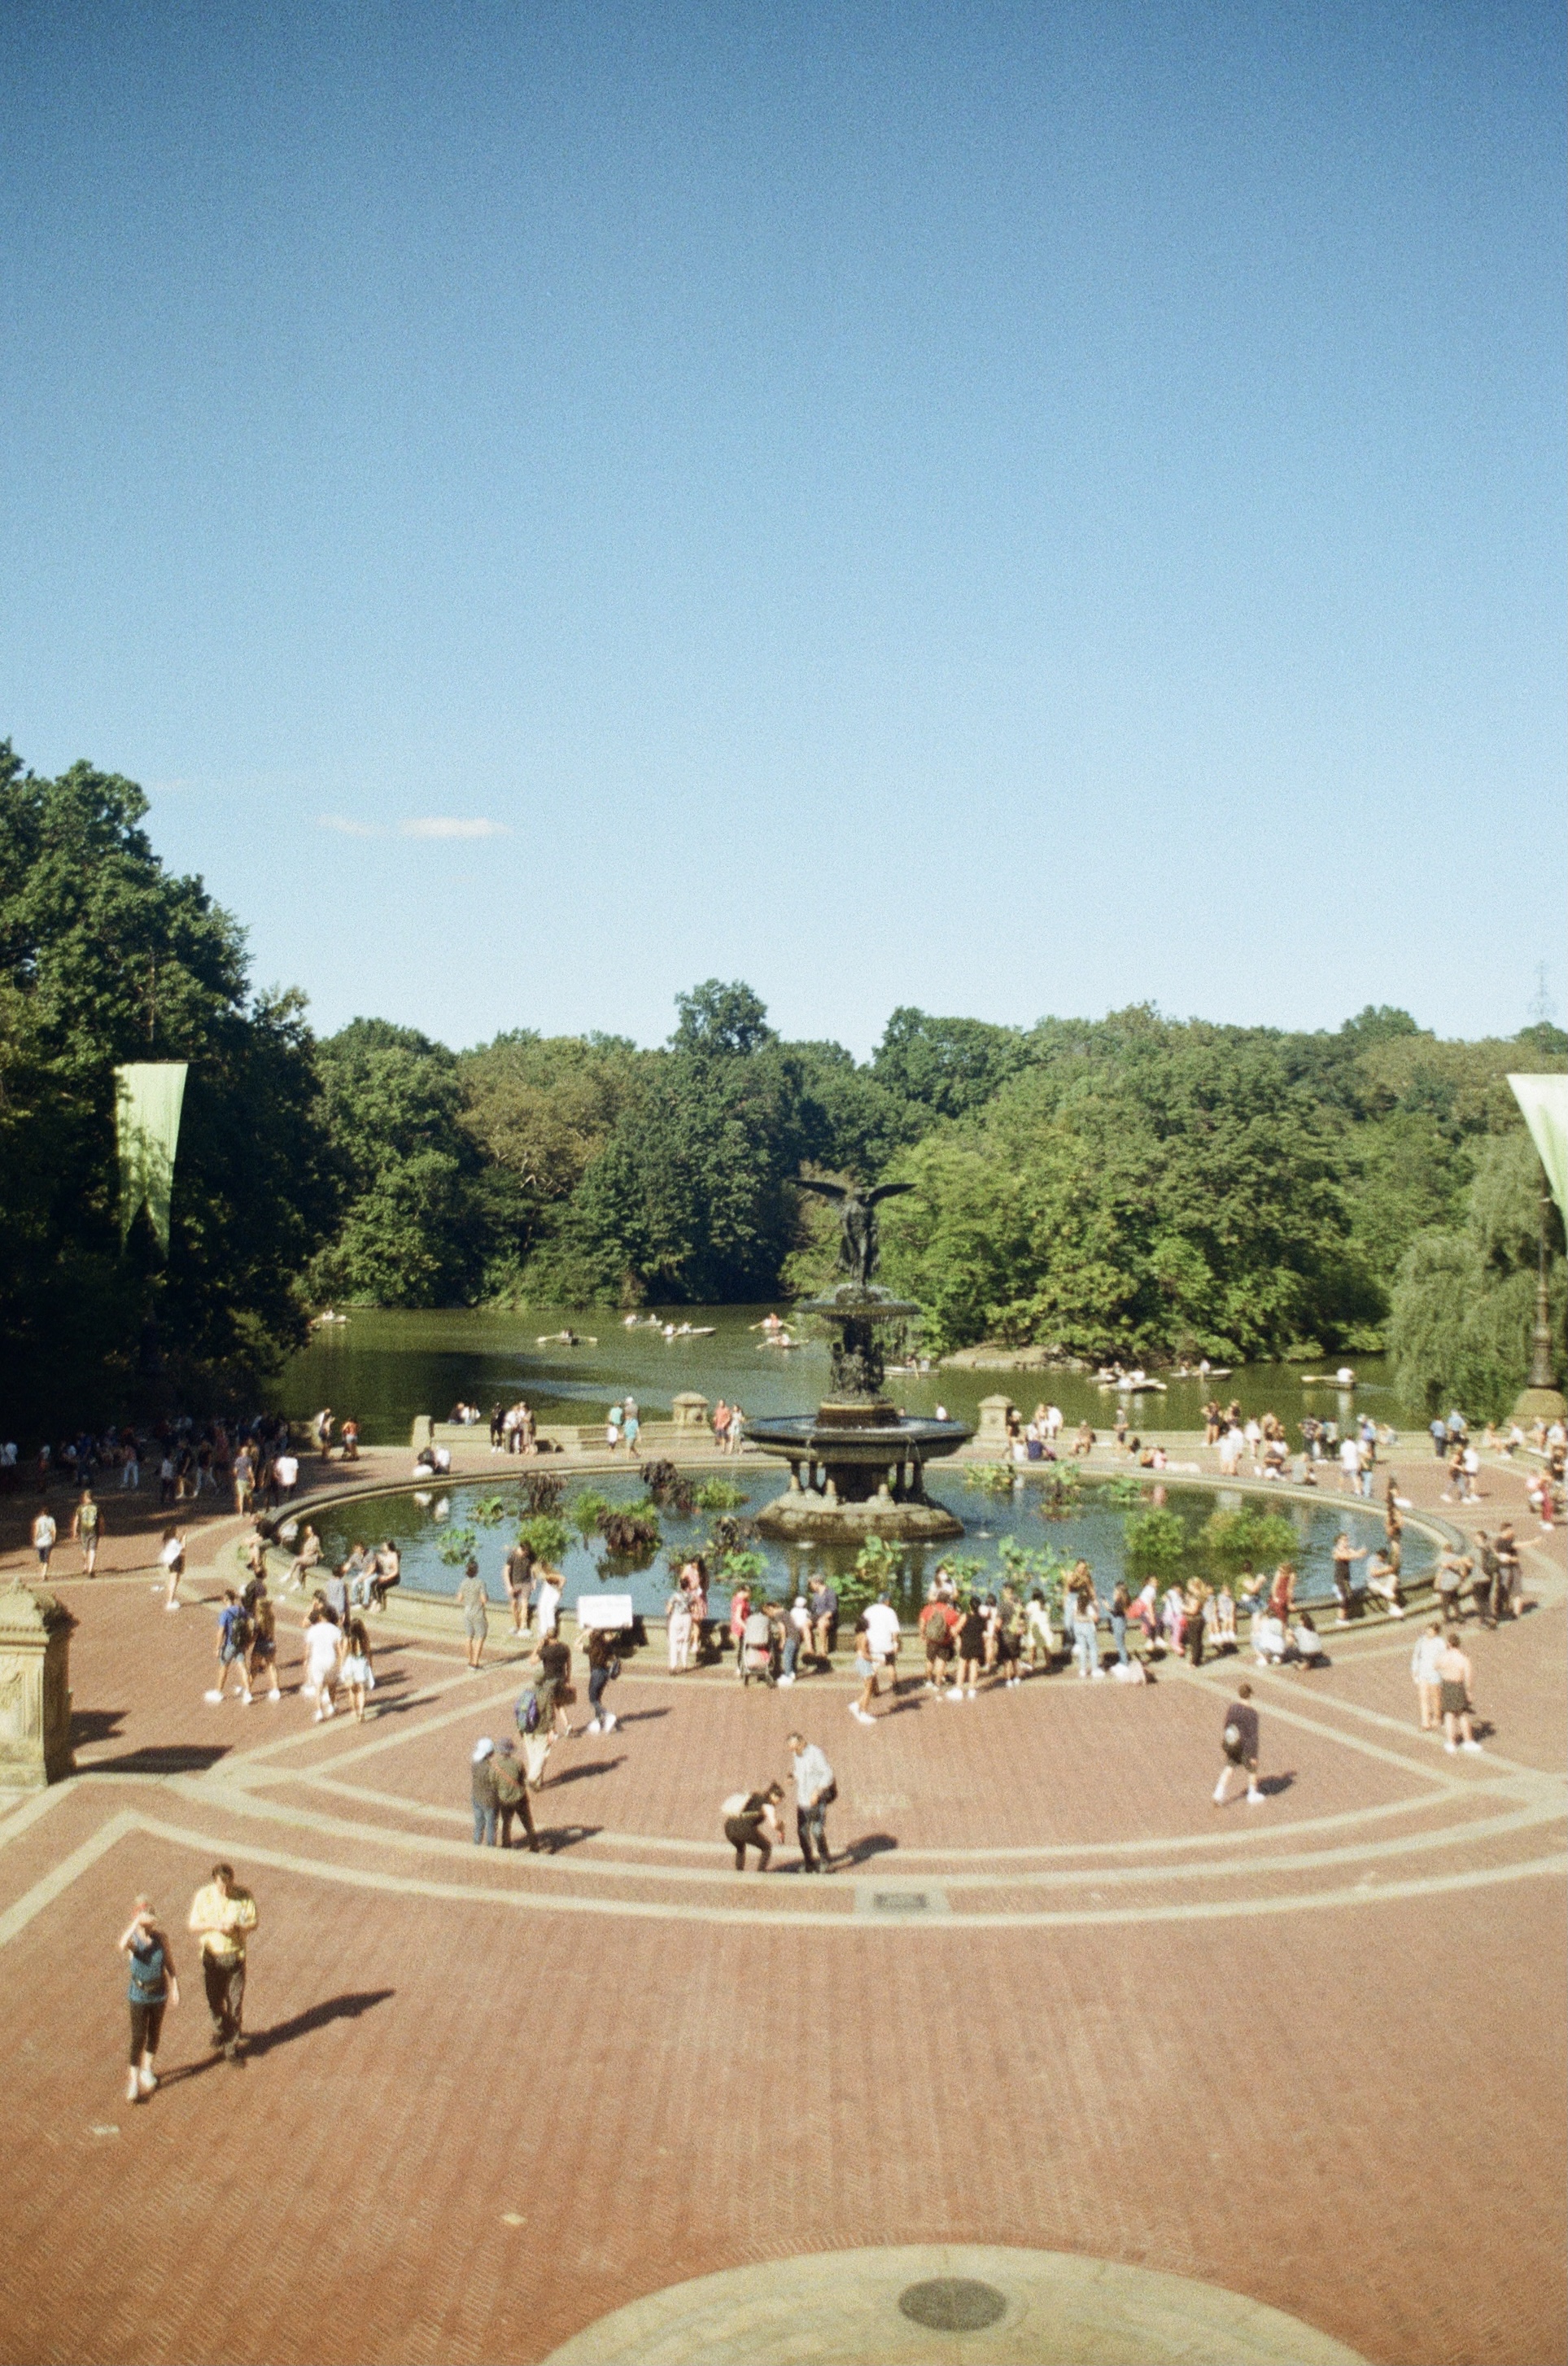 people gathered around bethesda fountain in central park in new york city, shot on film